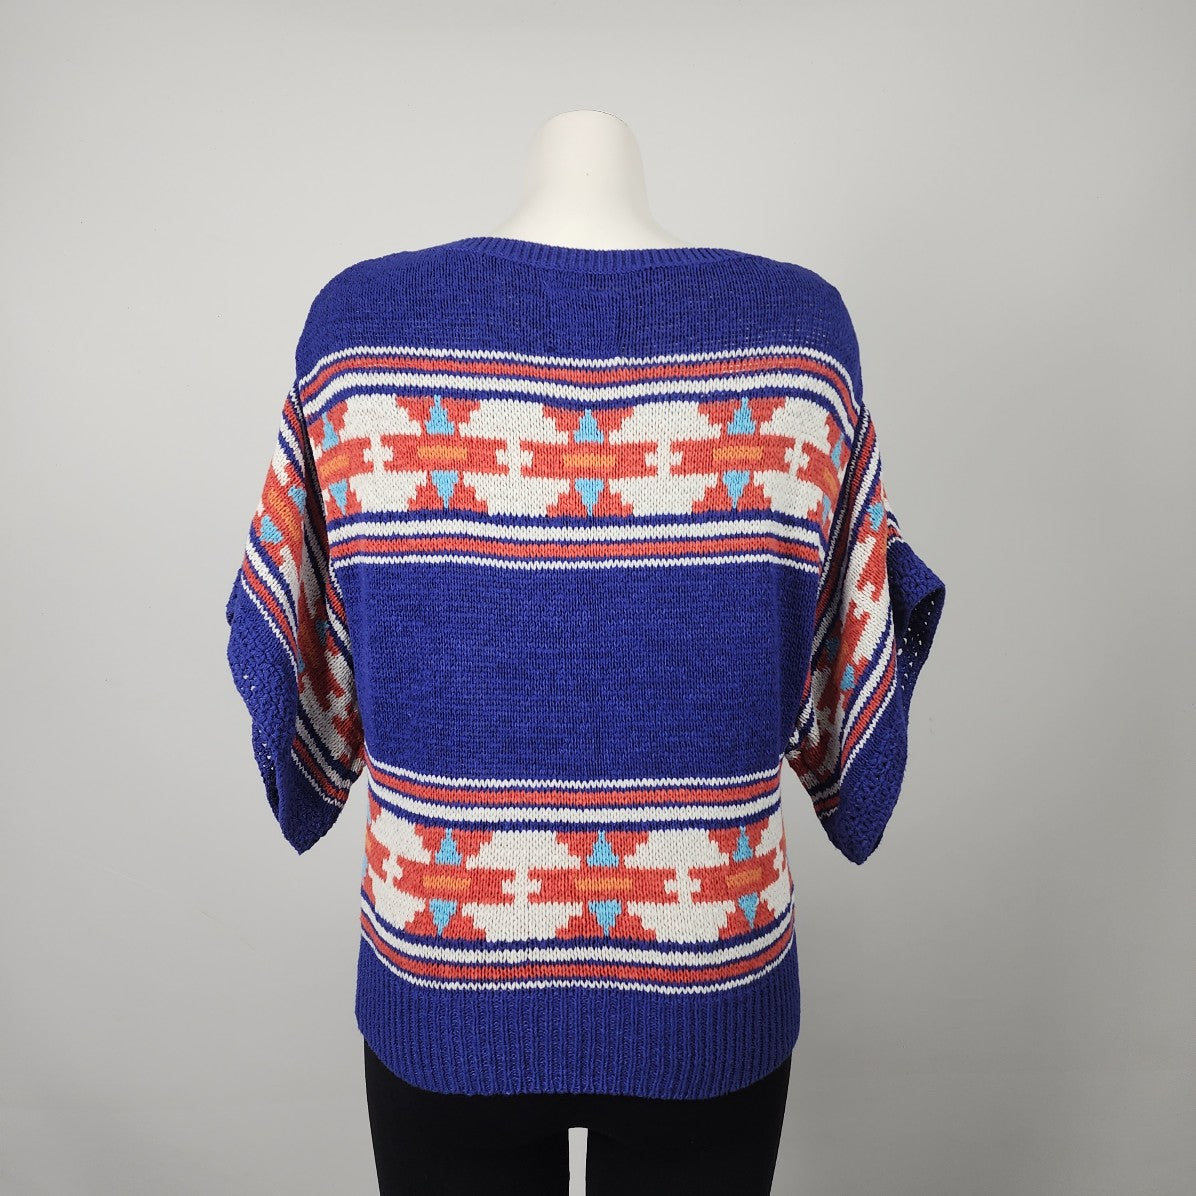 American Eagle Outfitter Blue & Red Cotton Blend Knit Sweater Size M/L